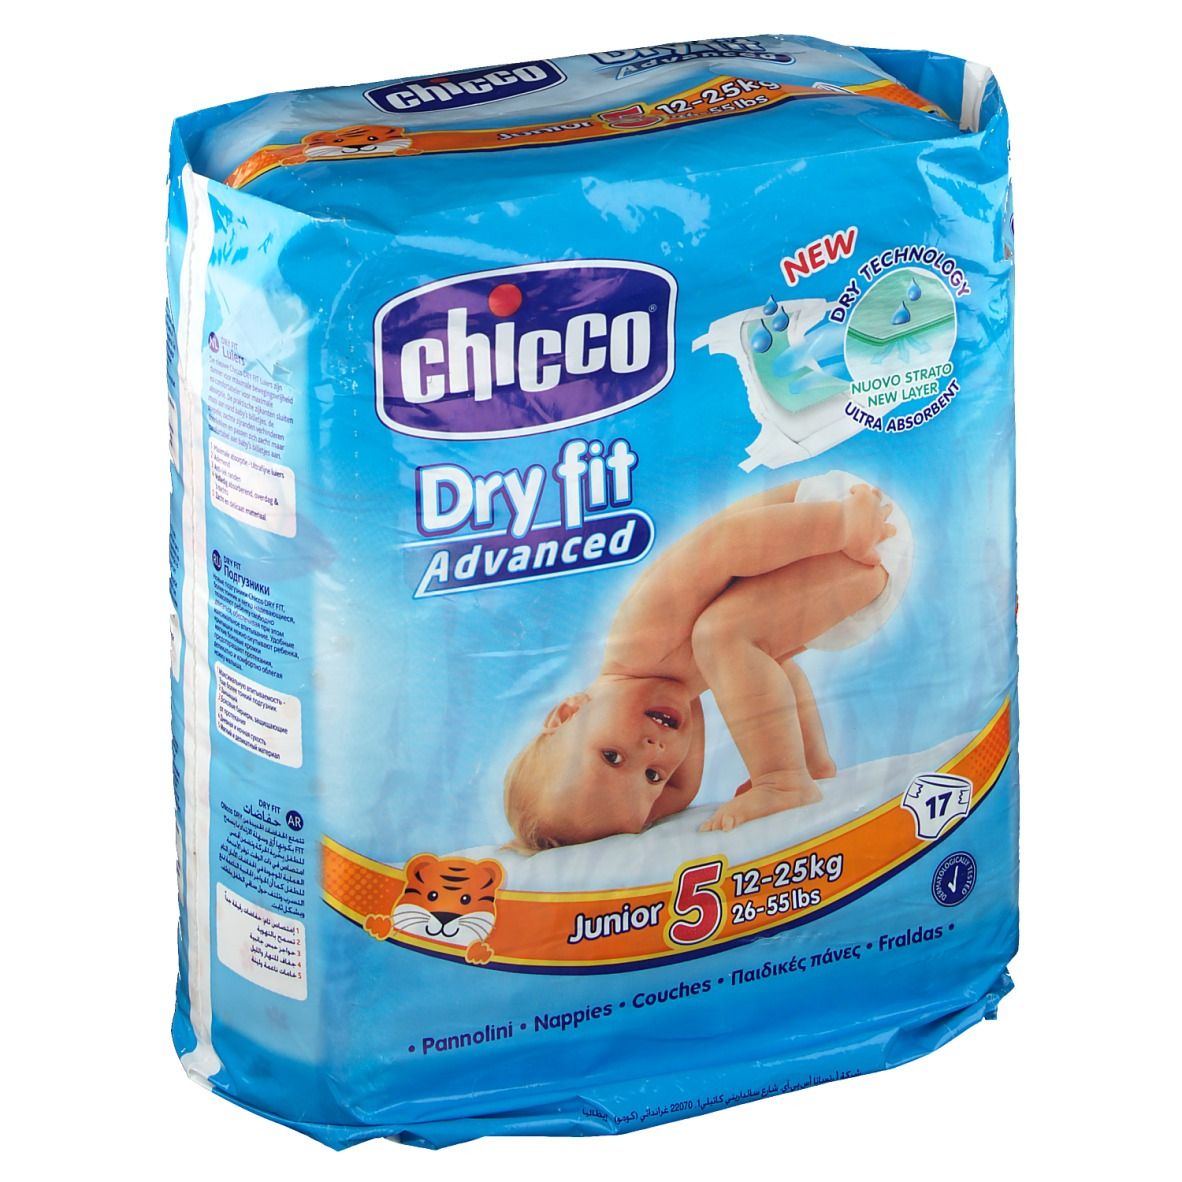 Chicco® Dry Fit Advance Junior 12-25 Kg